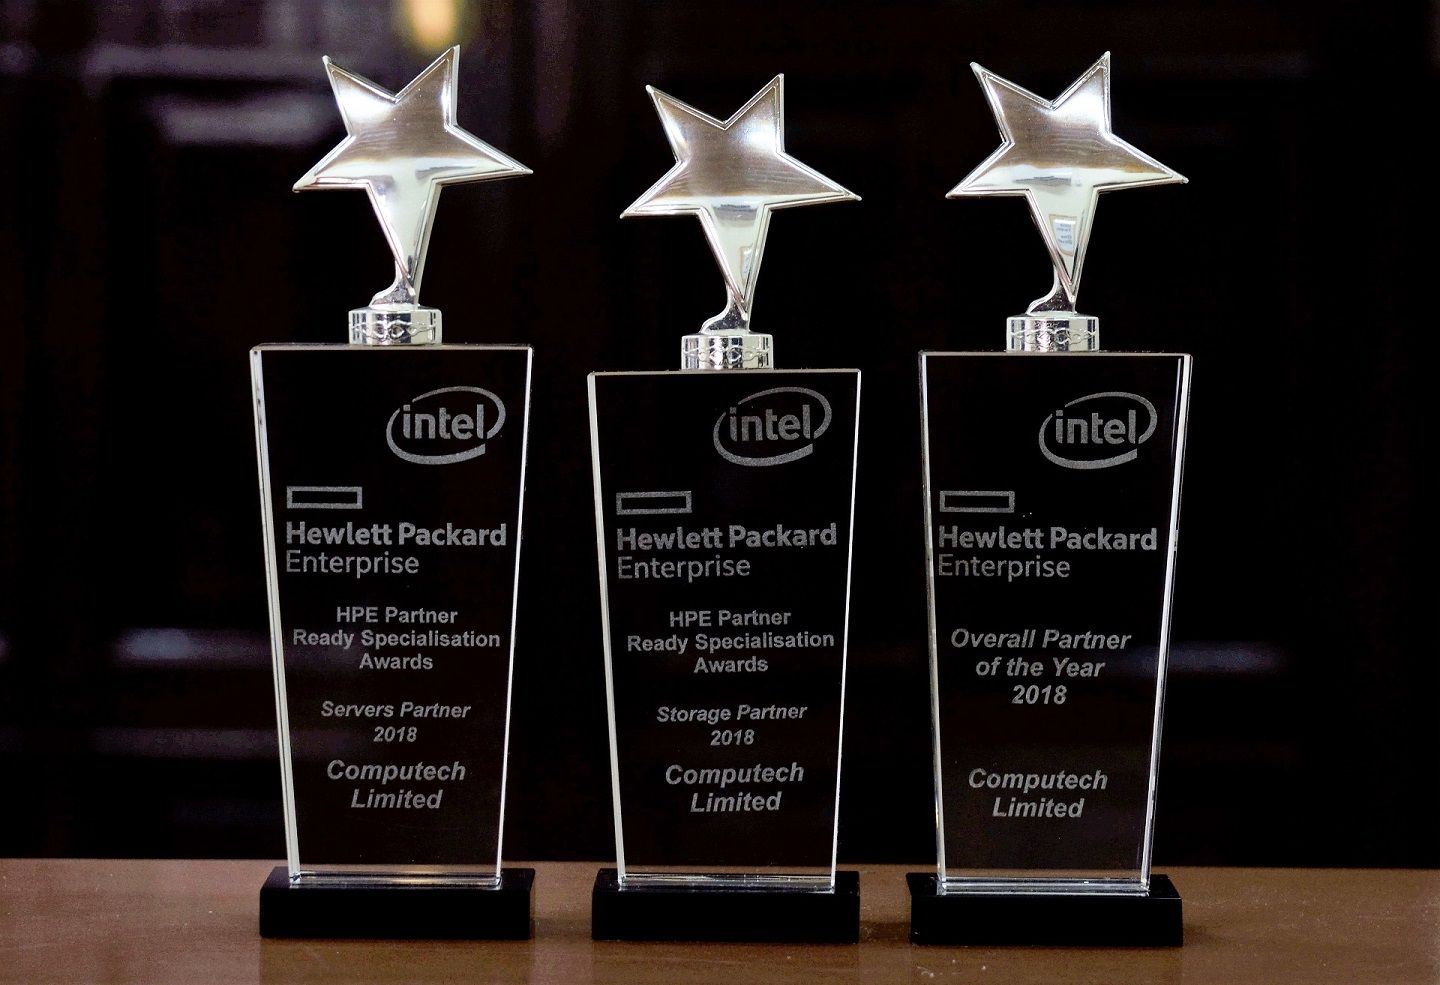 Computech’s 3 awards won at the event, the highest number won by any partner